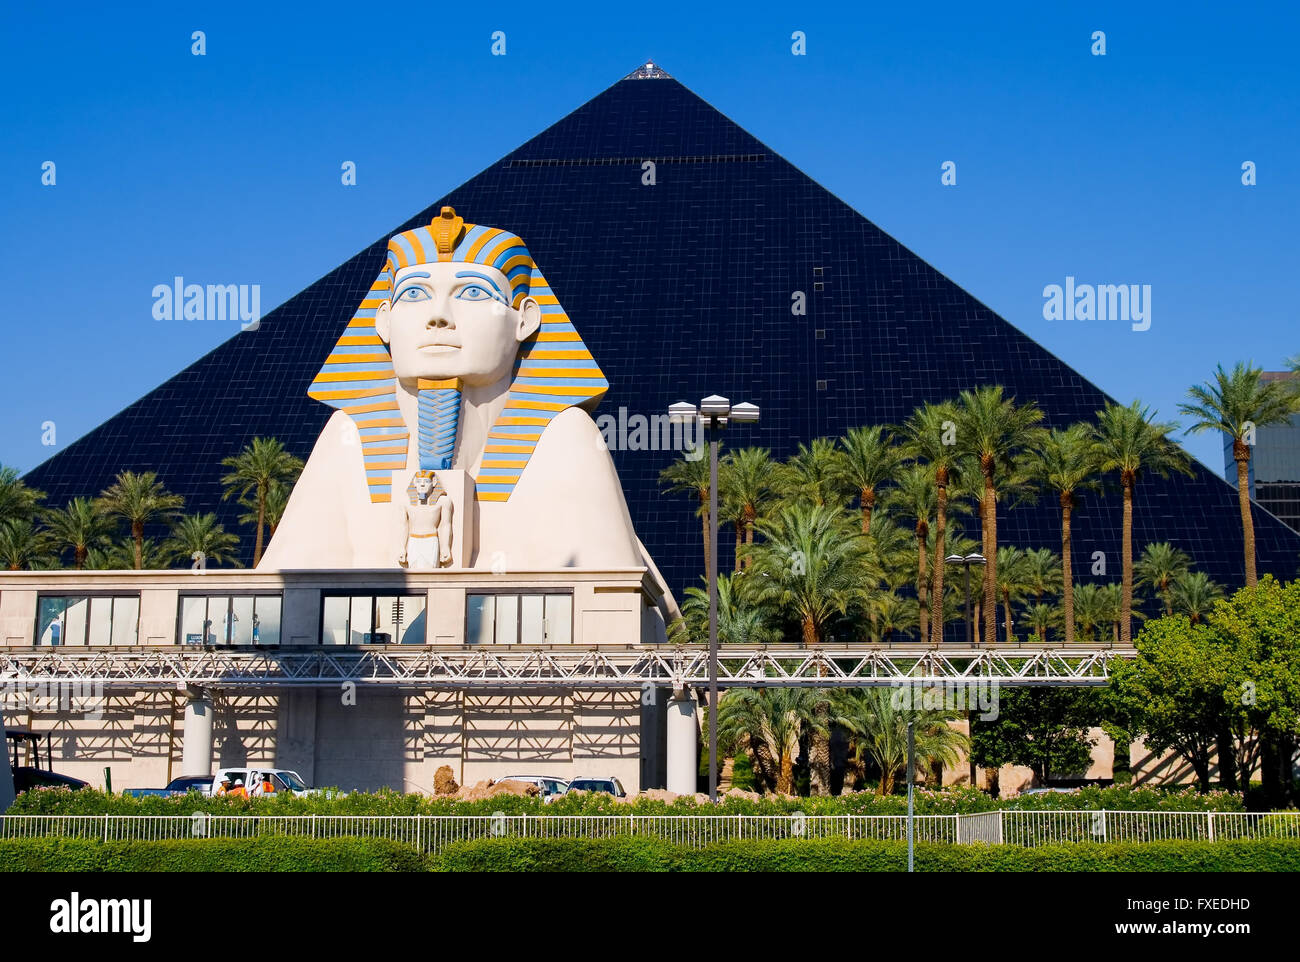 Pyramid Hotel and Sphinx in Las Vegas Stock Photo - Alamy